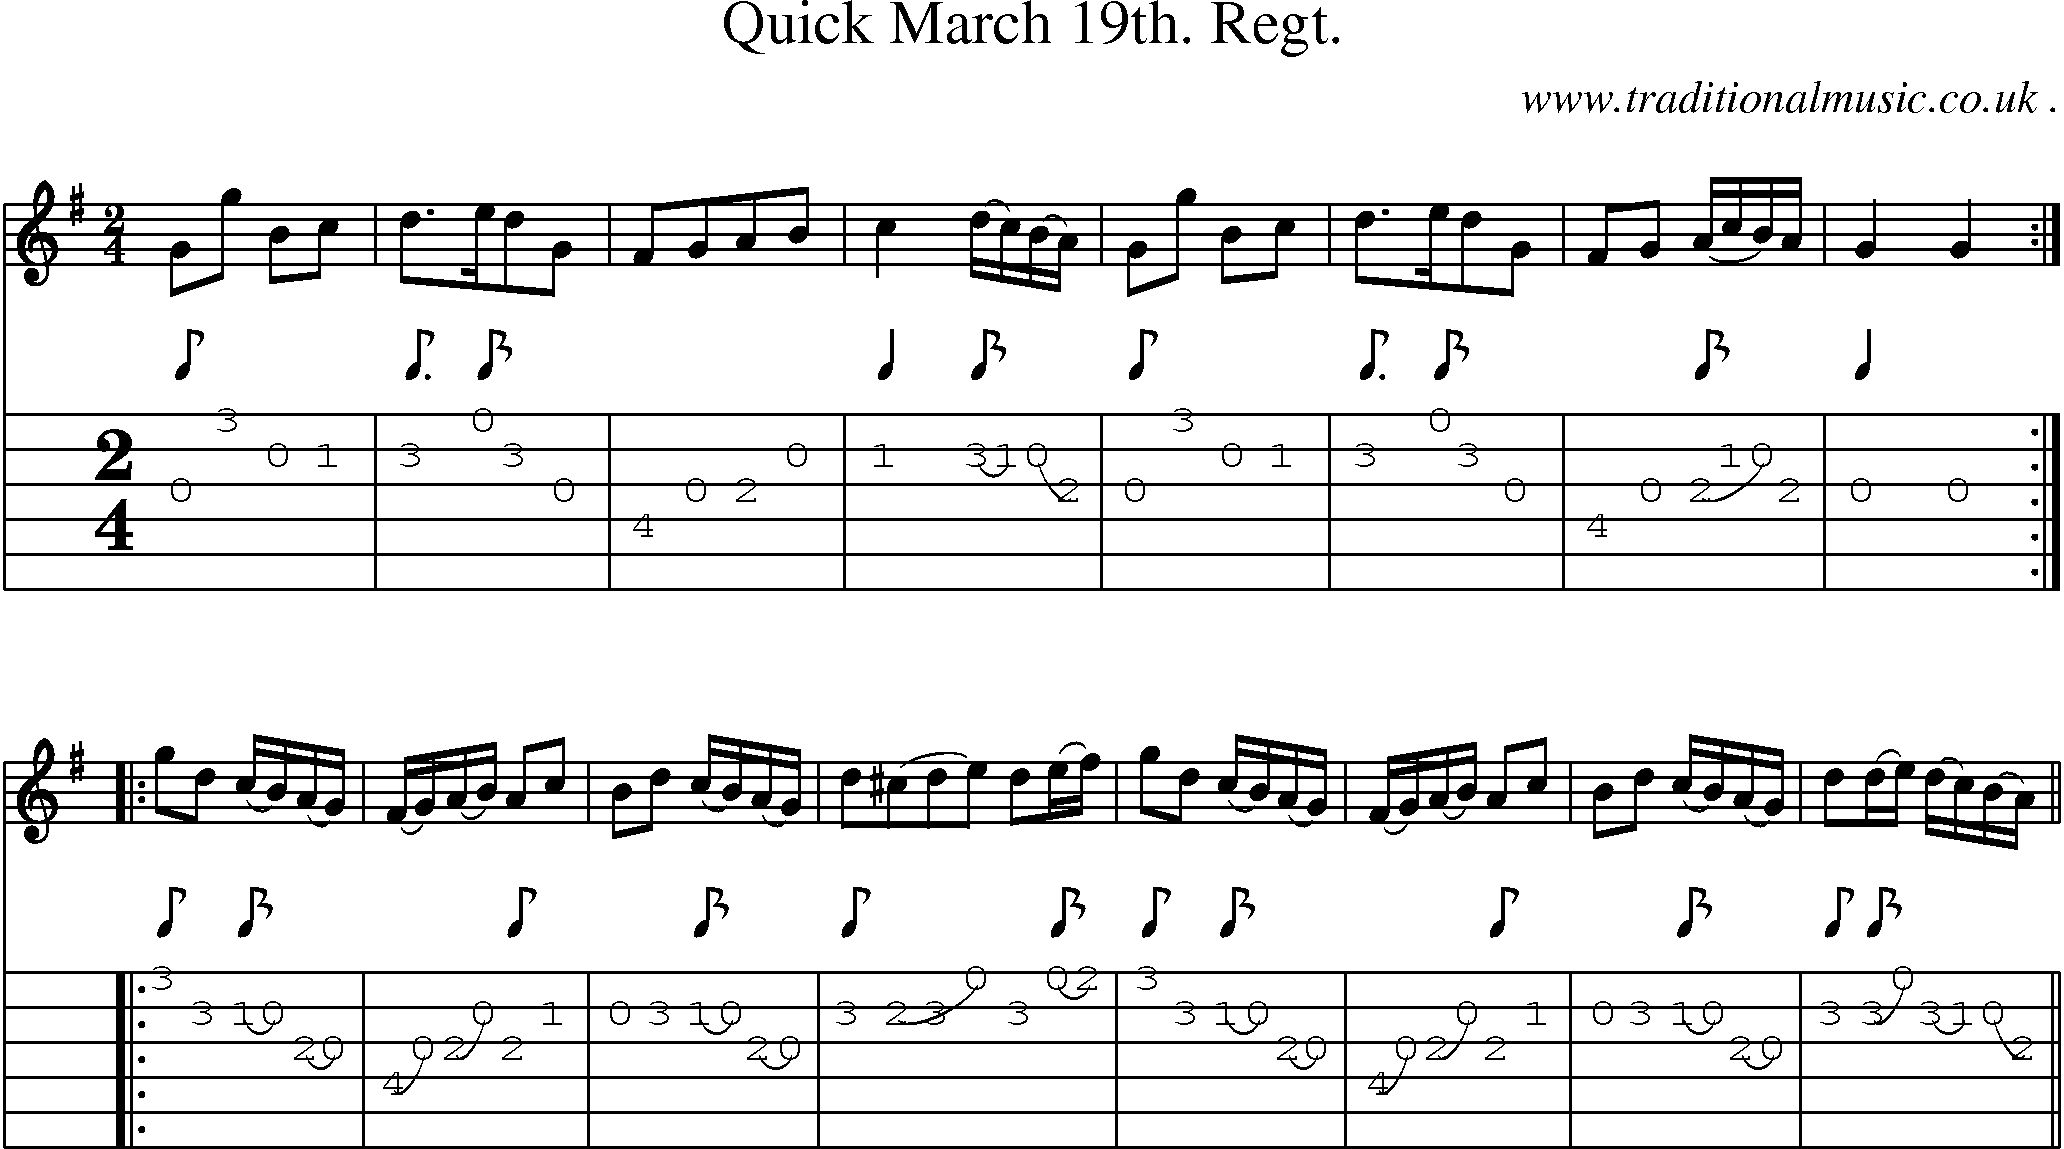 Sheet-music  score, Chords and Guitar Tabs for Quick March 19th Regt